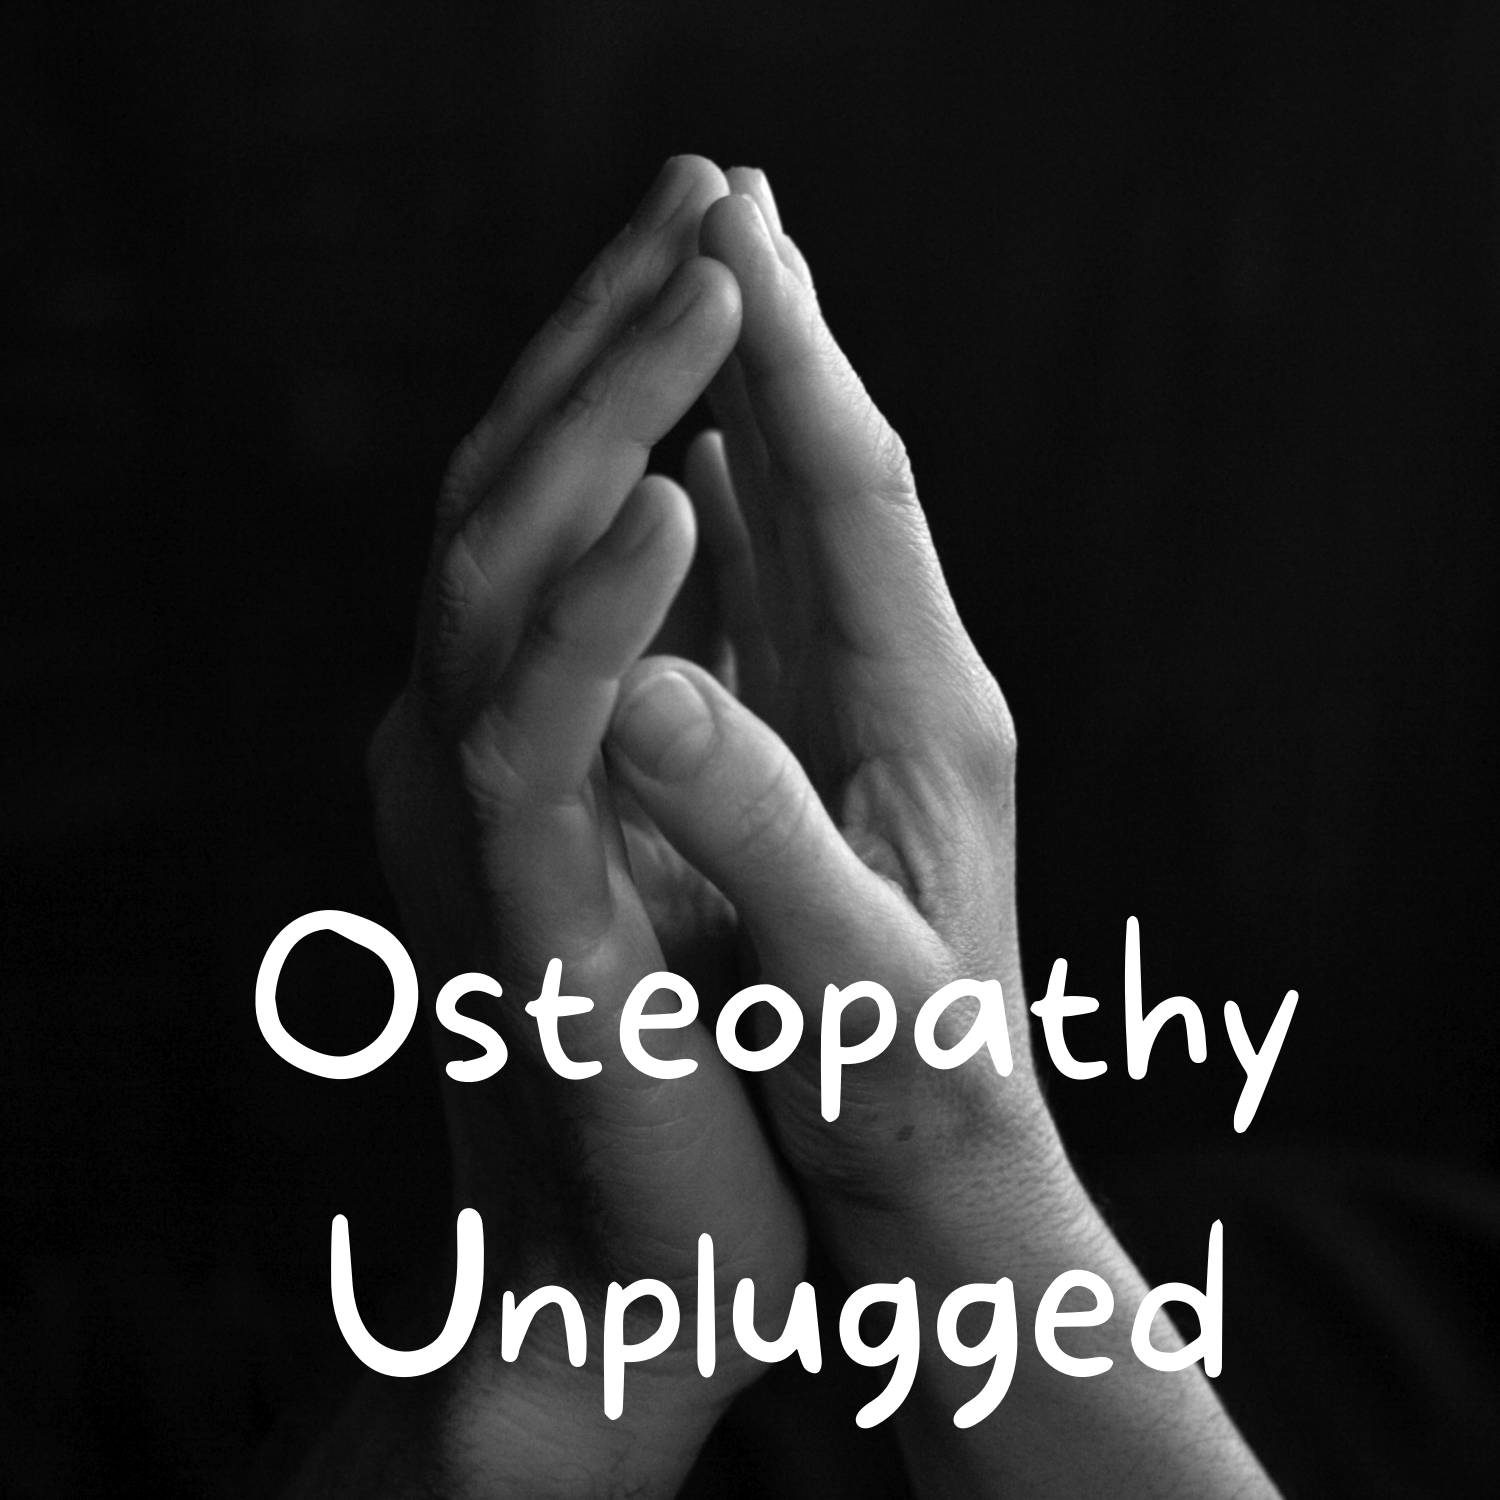 Episode 18 - Where To Start Or Not Start An Osteopathic Treatment